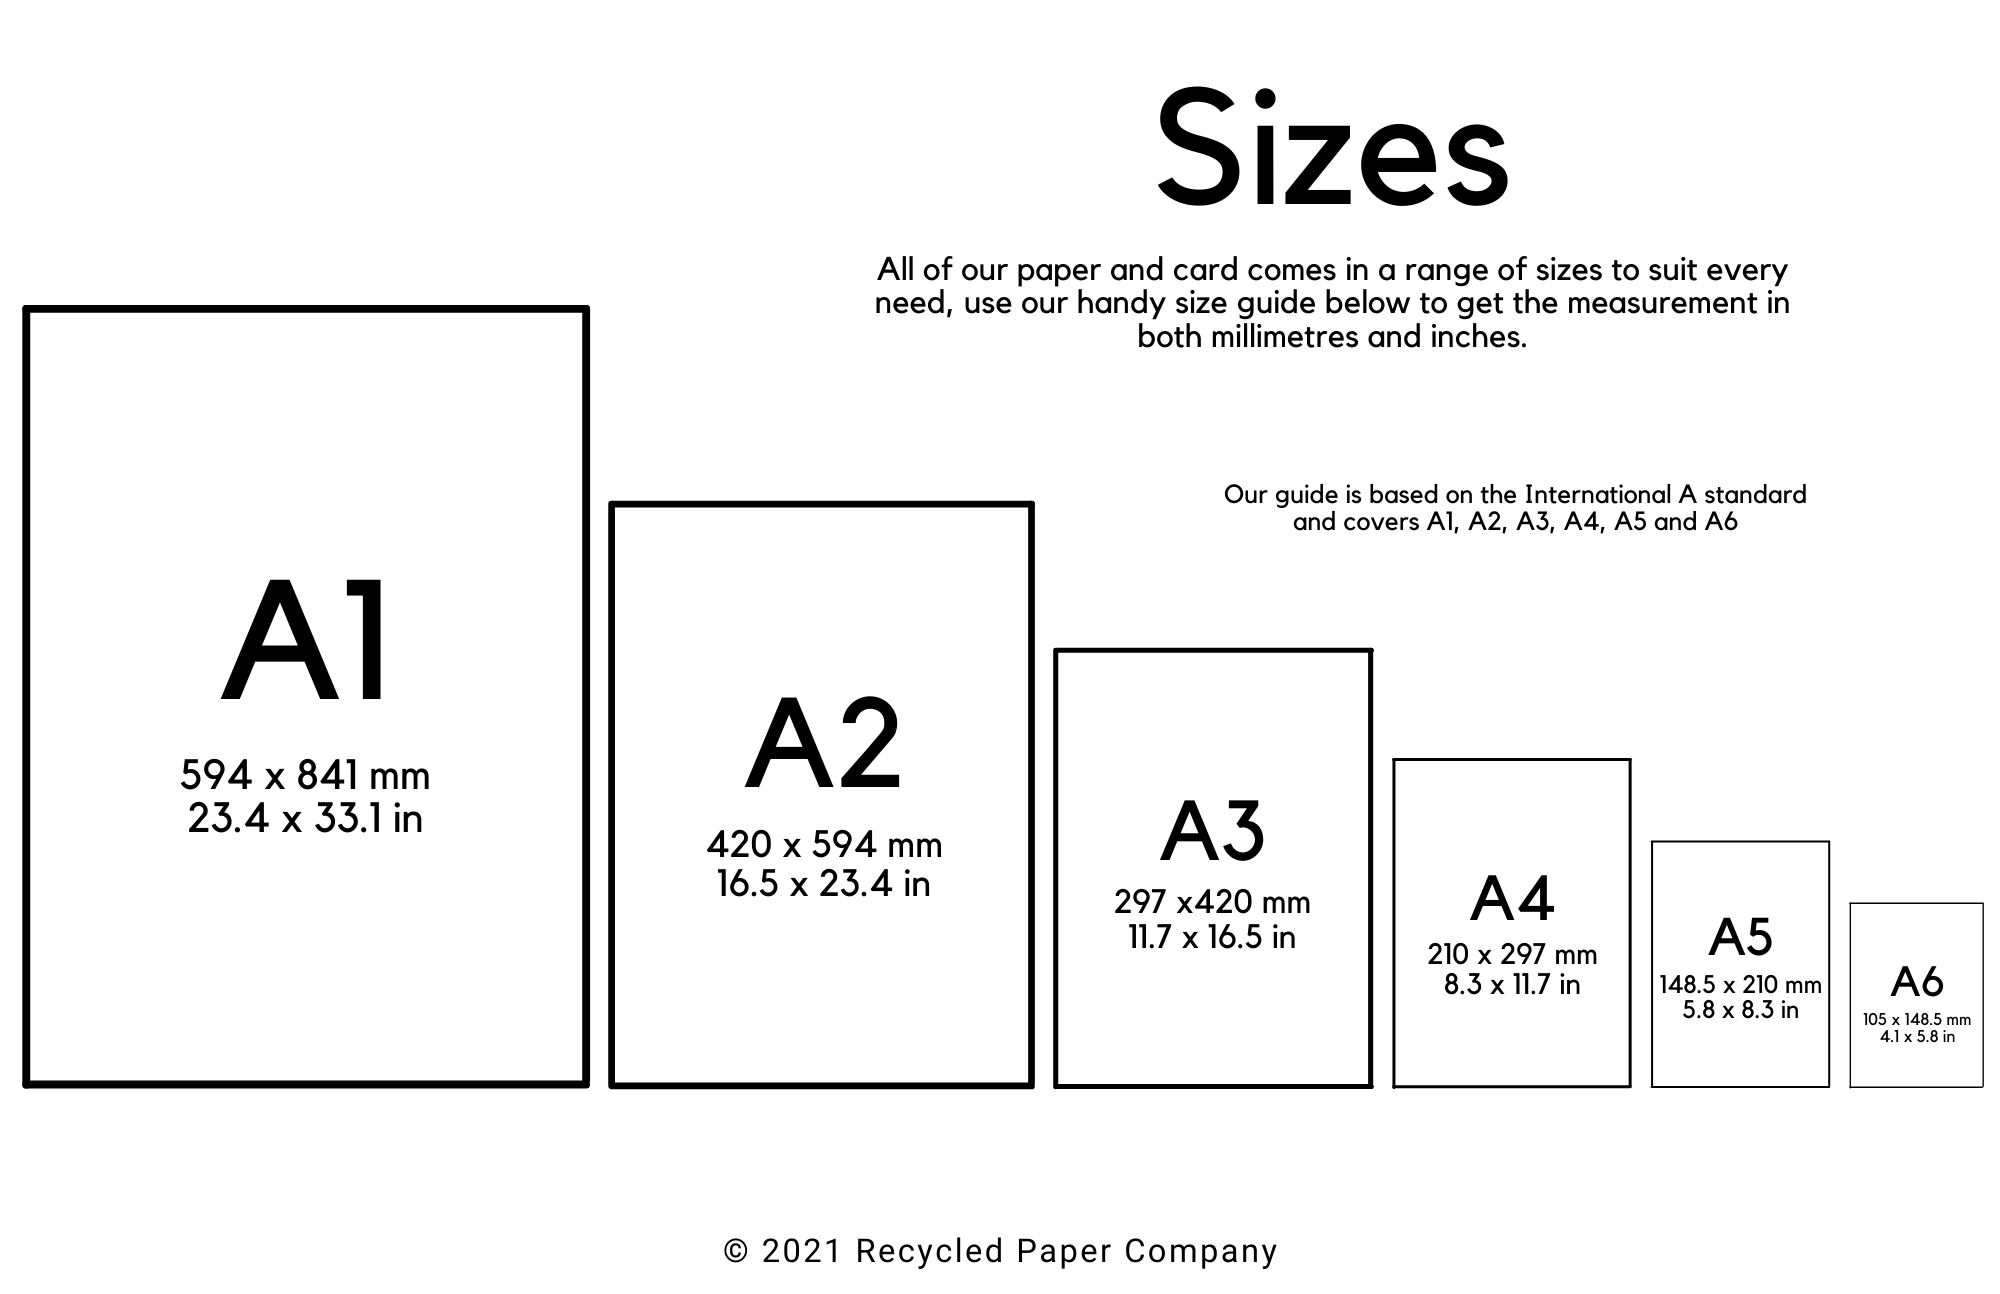 A-Series Paper Size Dimensions (in, cm, mm) - Neenah Paper